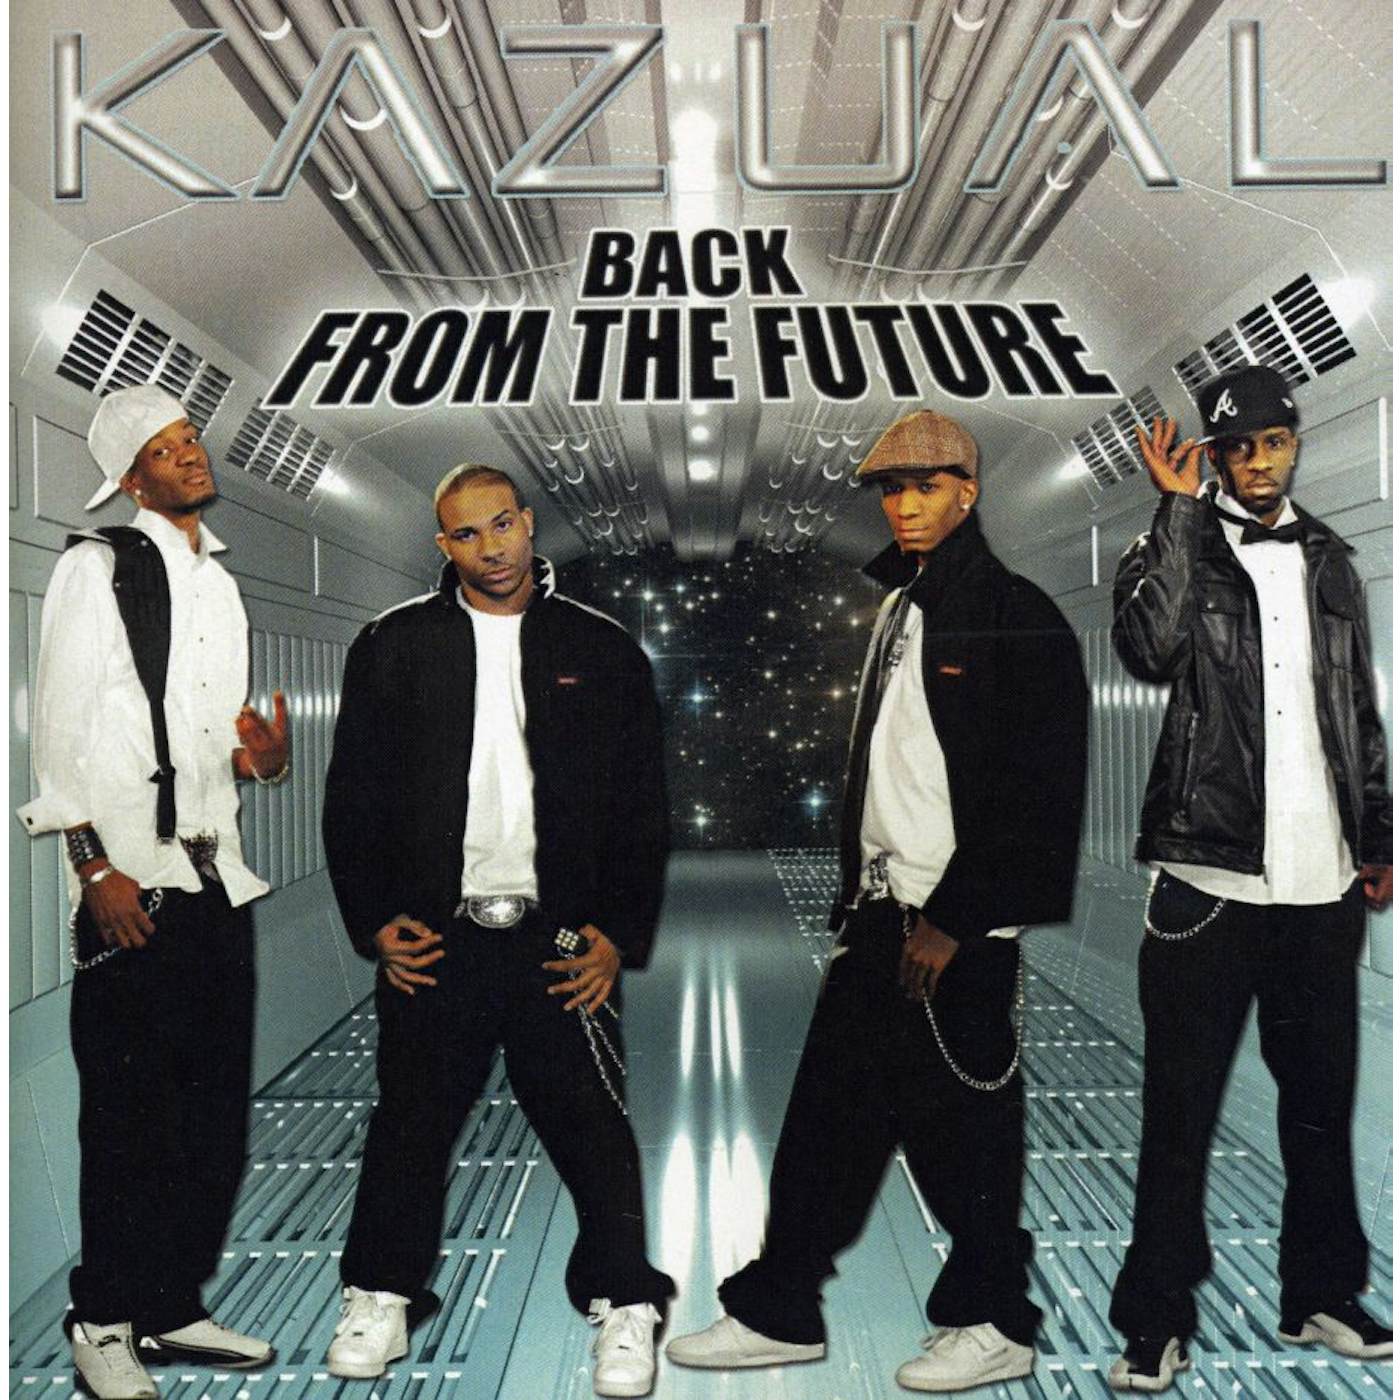 Kazual BACK FROM THE FUTURE CD